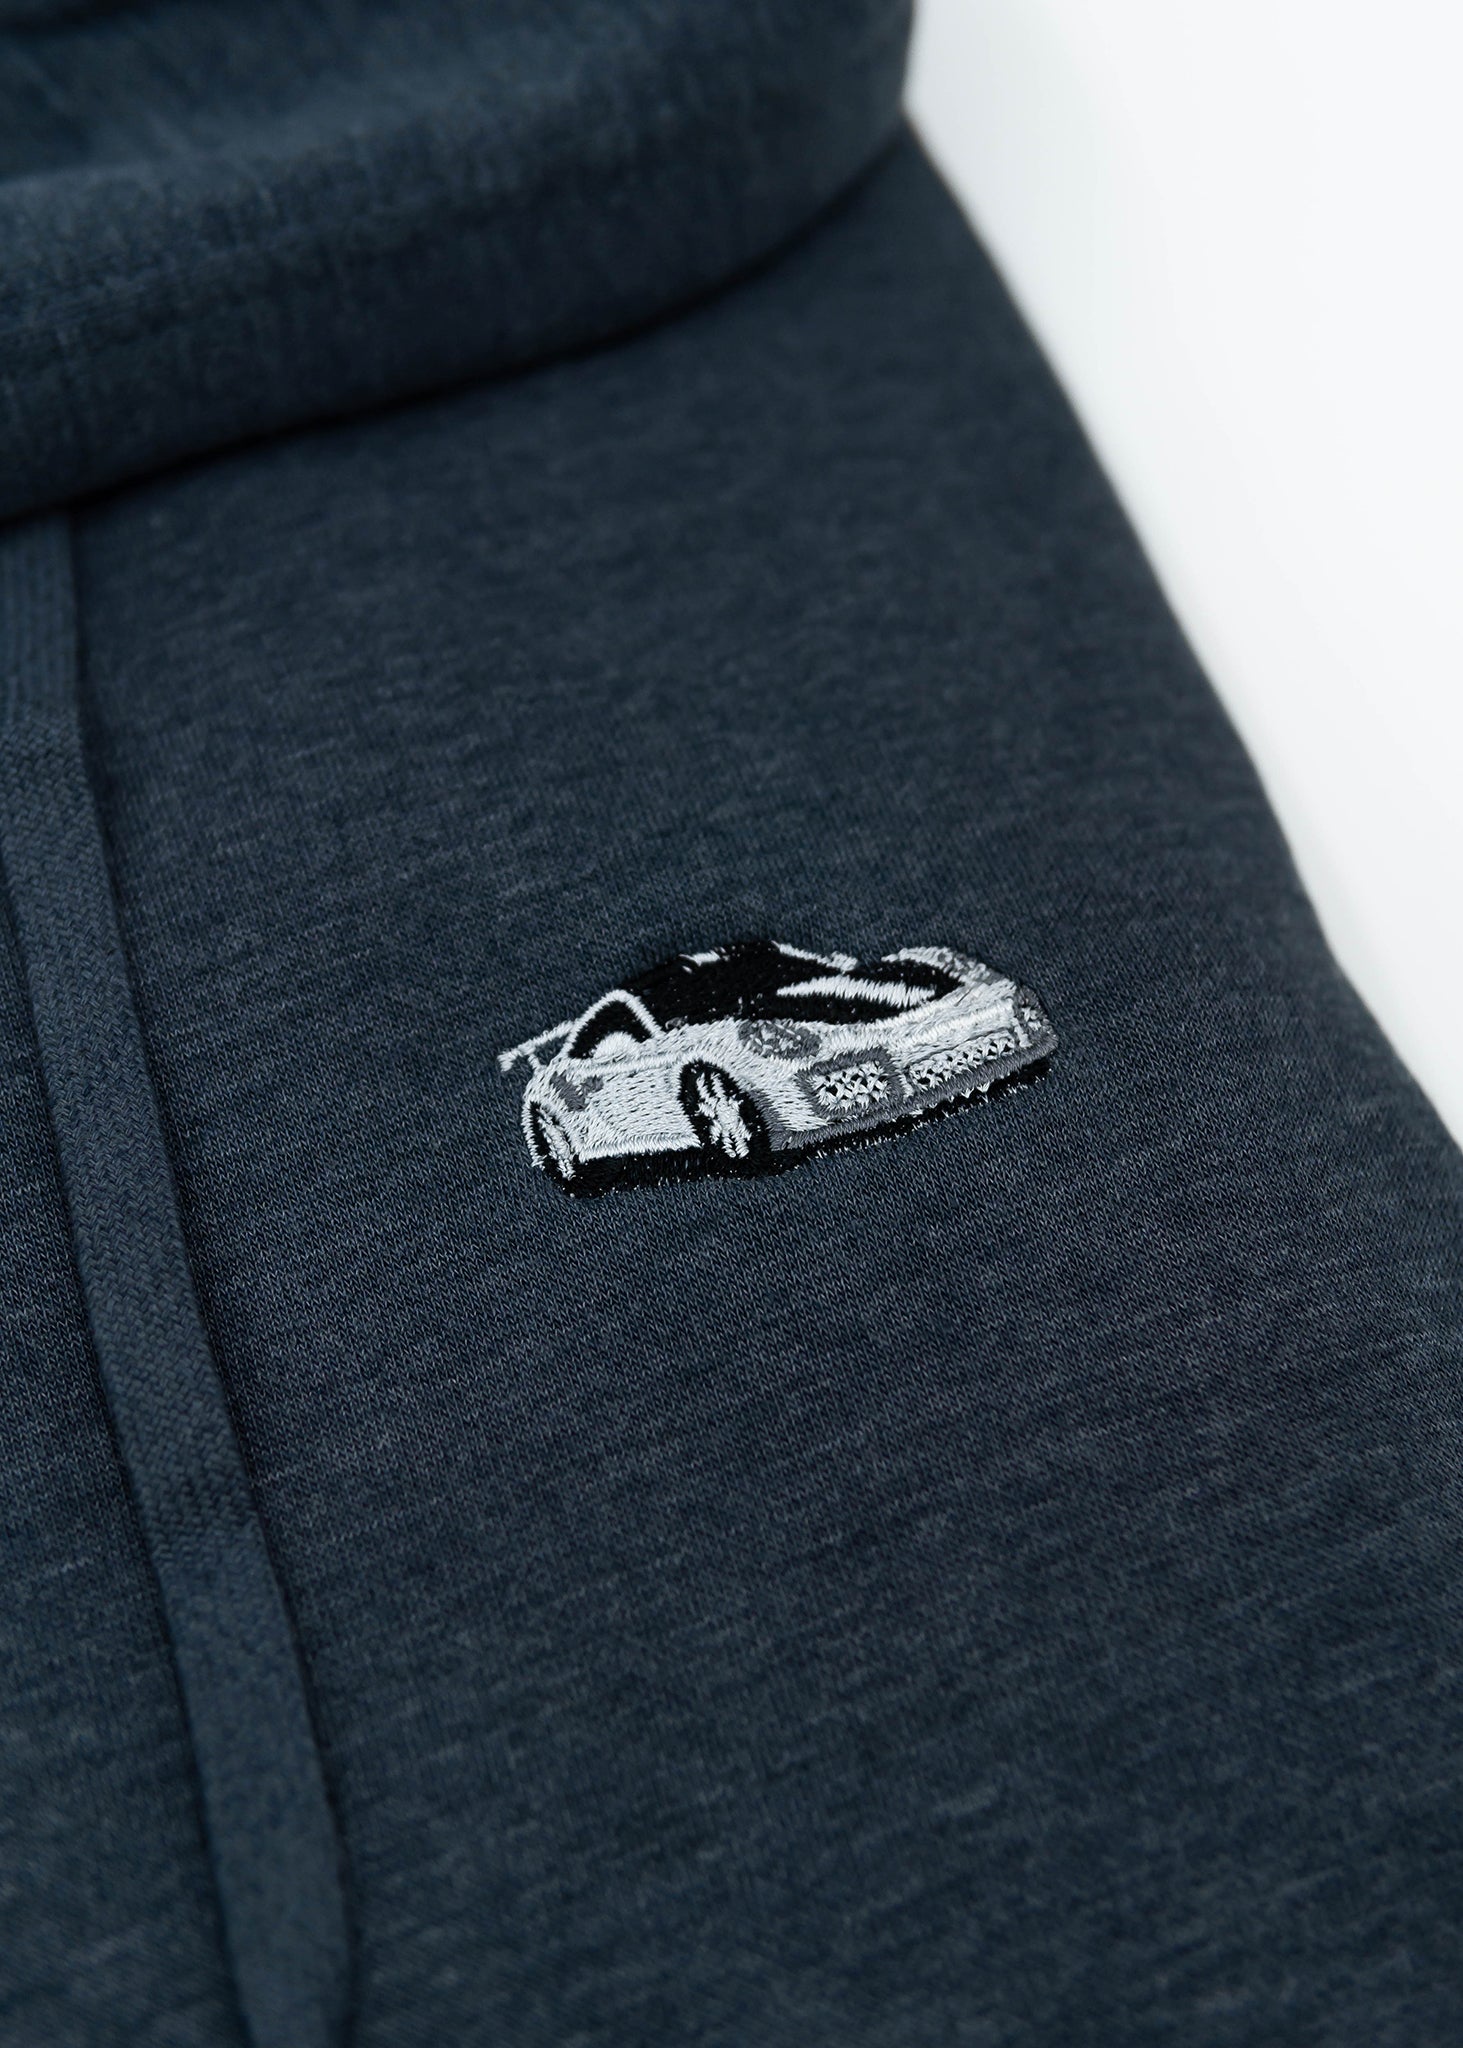 Close up of an embroidered GT2 RS on a navy blue unisex hoodie for men and women. Photo shows the high quality detailed embroidery of a white, silver, carbon fiber GT2 RS on the left chest. Fabric composition of the sweater is cotton, polyester, and rayon. The material is very soft, stretchy, and non-transparent. The style of this hoodie is long sleeve, crewneck with a hood, hooded, with embroidery on the left chest.